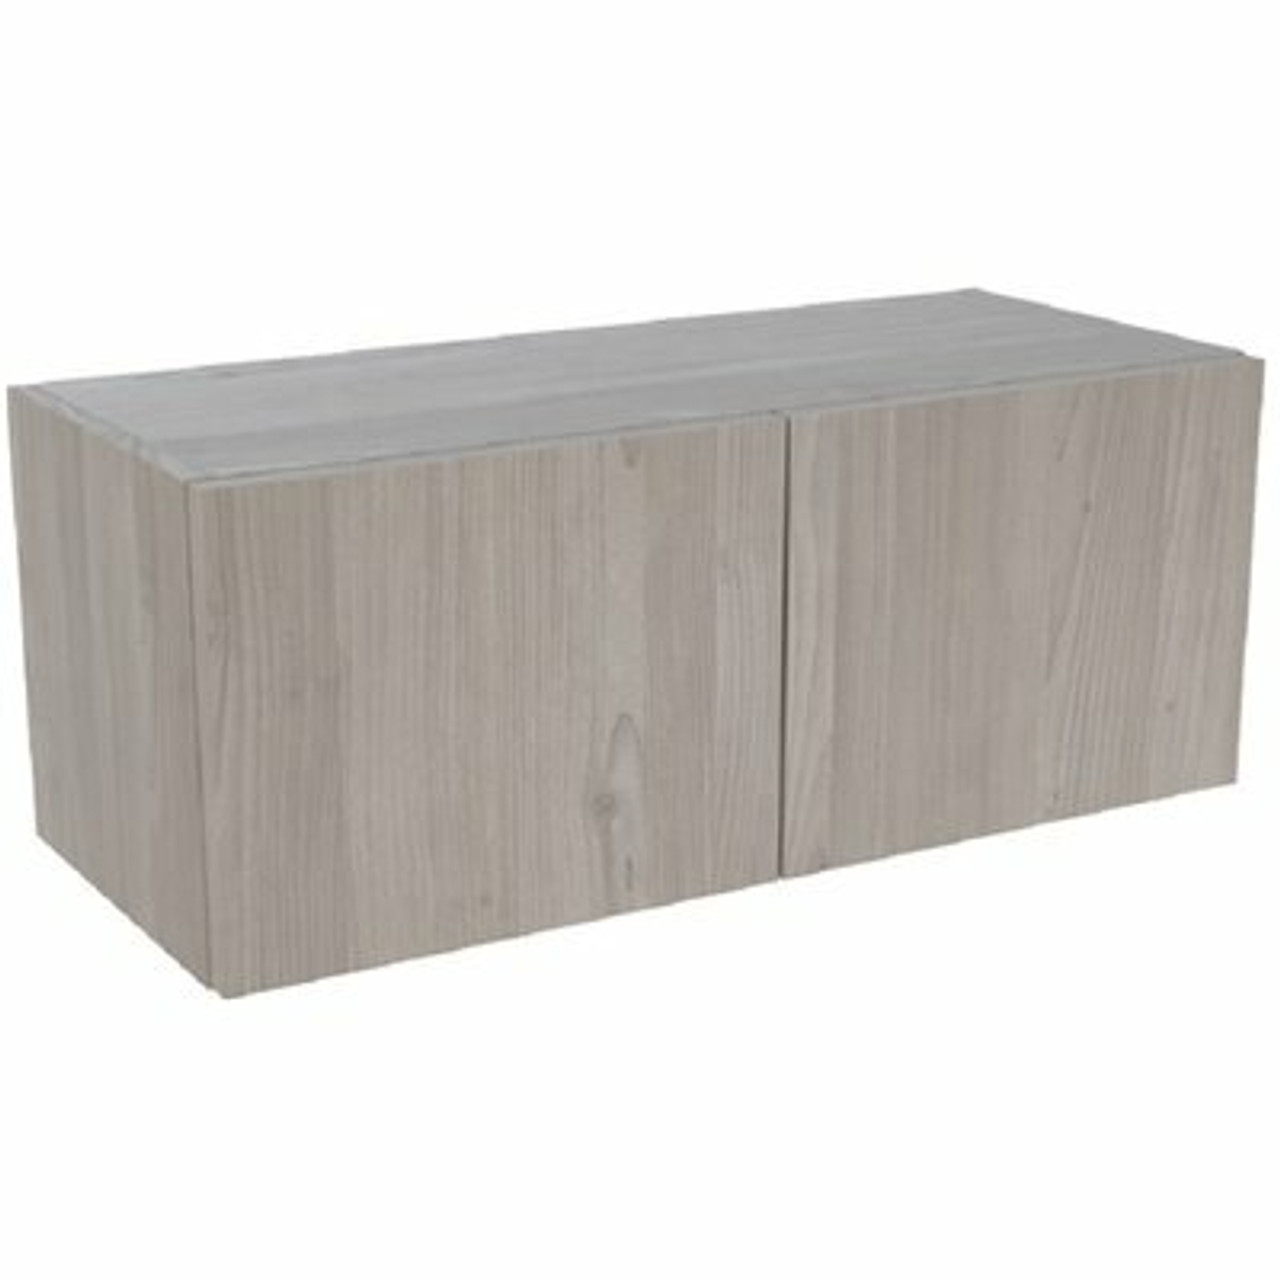 Cambridge Ready To Assemble Threespine 36 In. X 24 In. X 12 In. Stock Bridge Base Cabinet In Grey Nordic